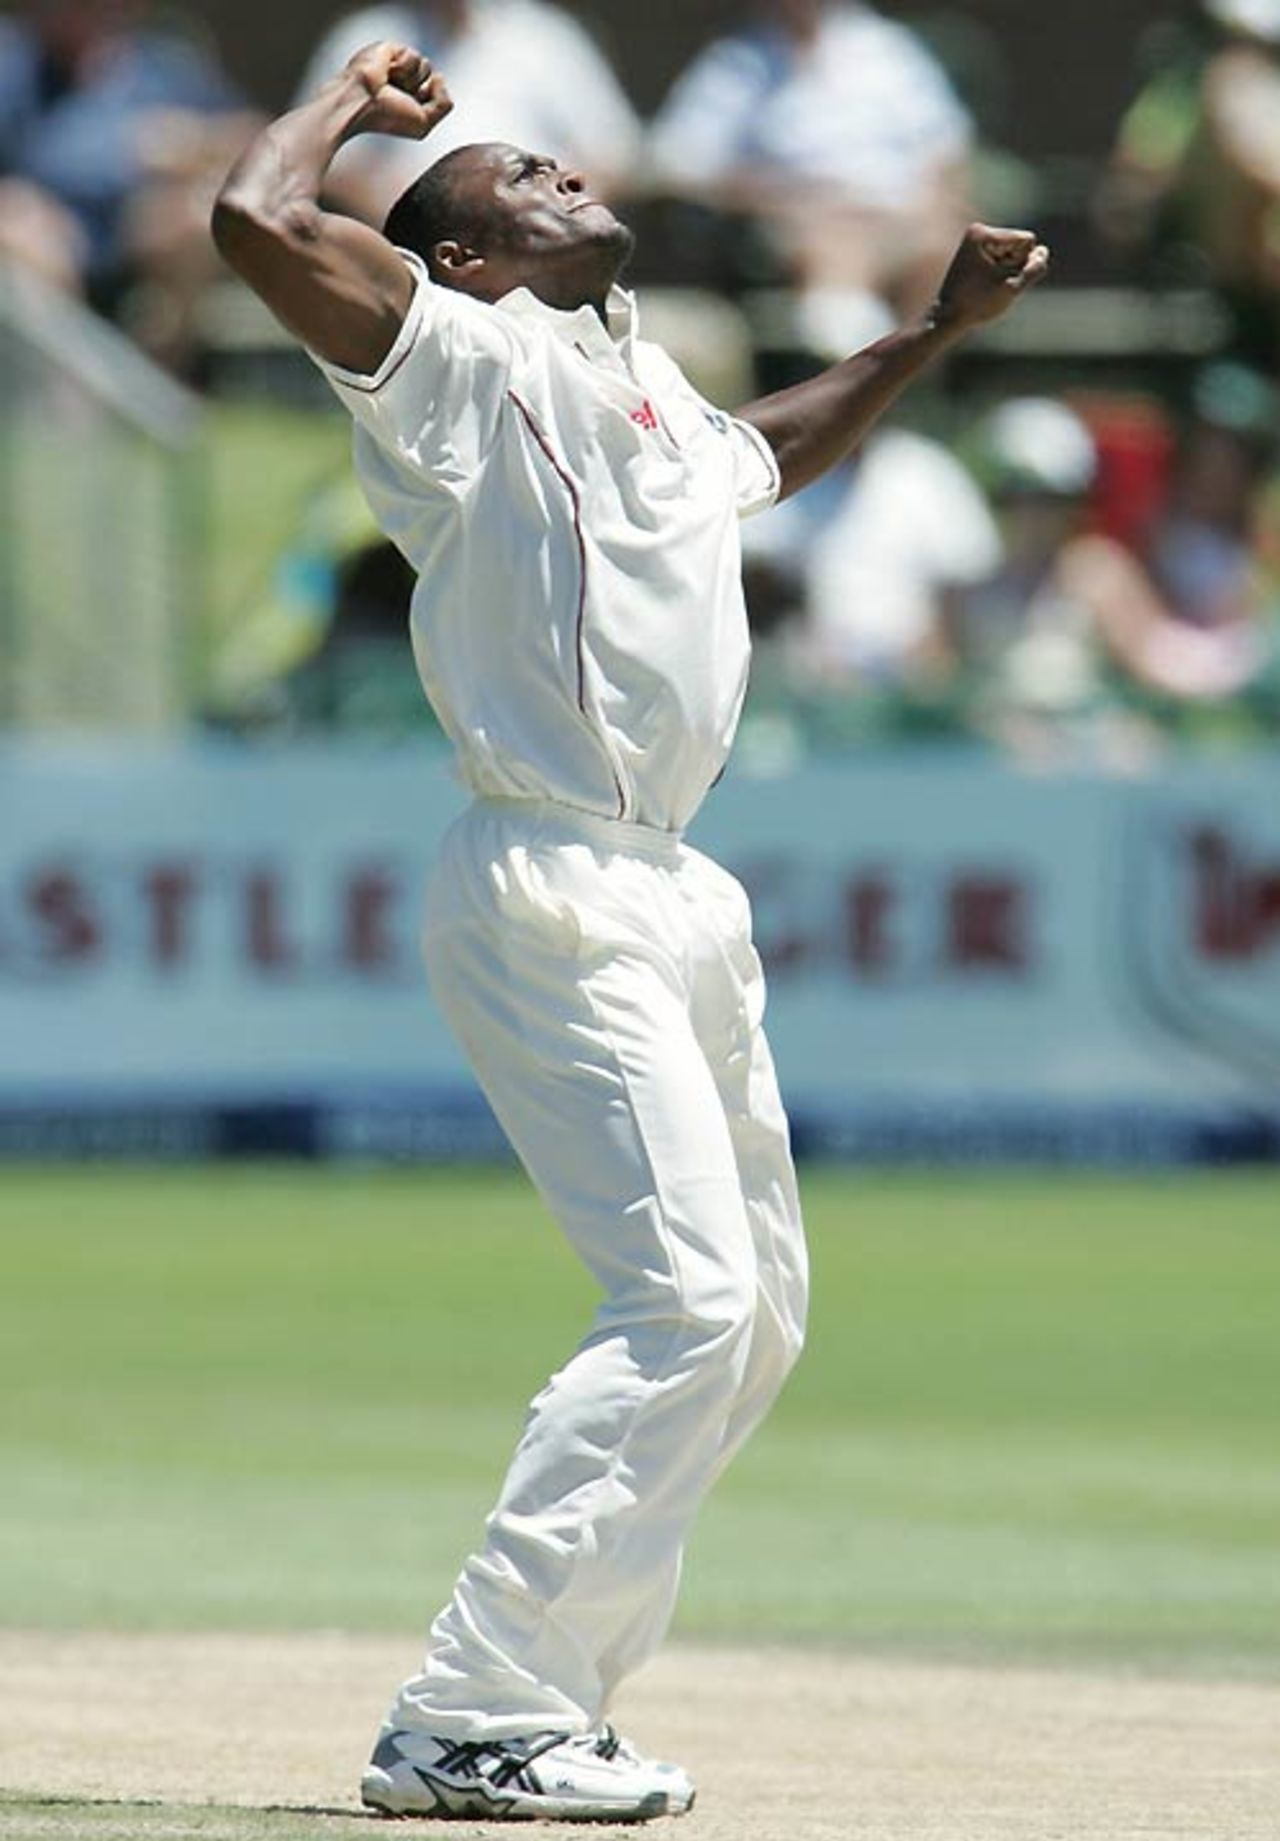 Daren Powell is delighted after getting Herschelle Gibbs out for a pair, South Africa v West Indies, 1st Test, Port Elizabeth, 4th day, December 29, 2007